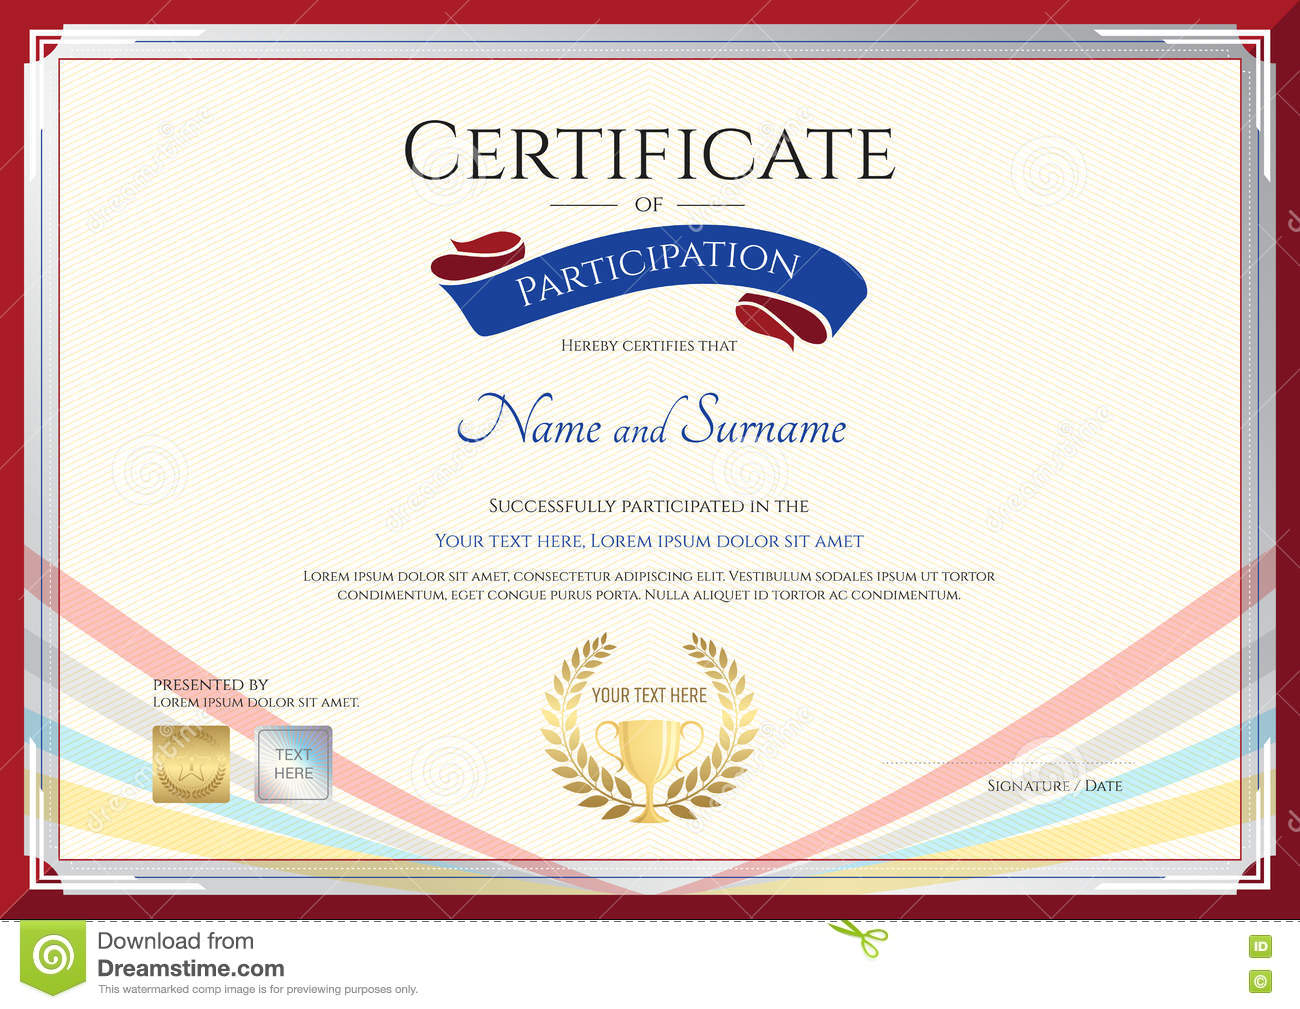 Certificate Template For Achievement, Appreciation Or For International Conference Certificate Templates